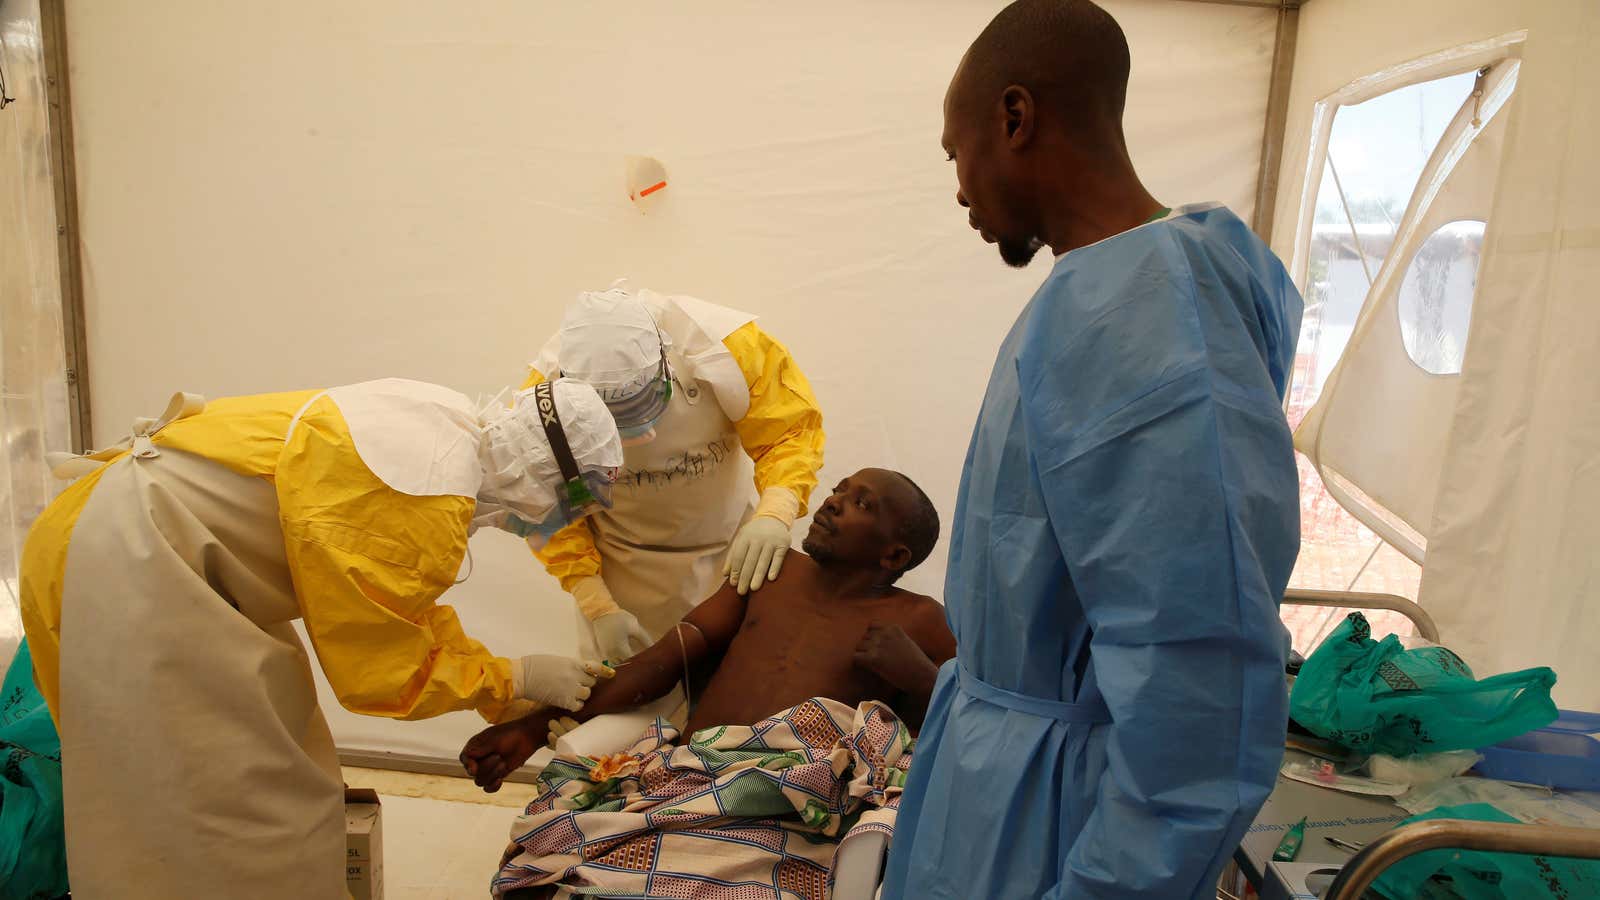 Medical staff and an Ebola survivor treat an Ebola patient at a treatment centre in Beni, DR Congo, Mar. 31, 2019.